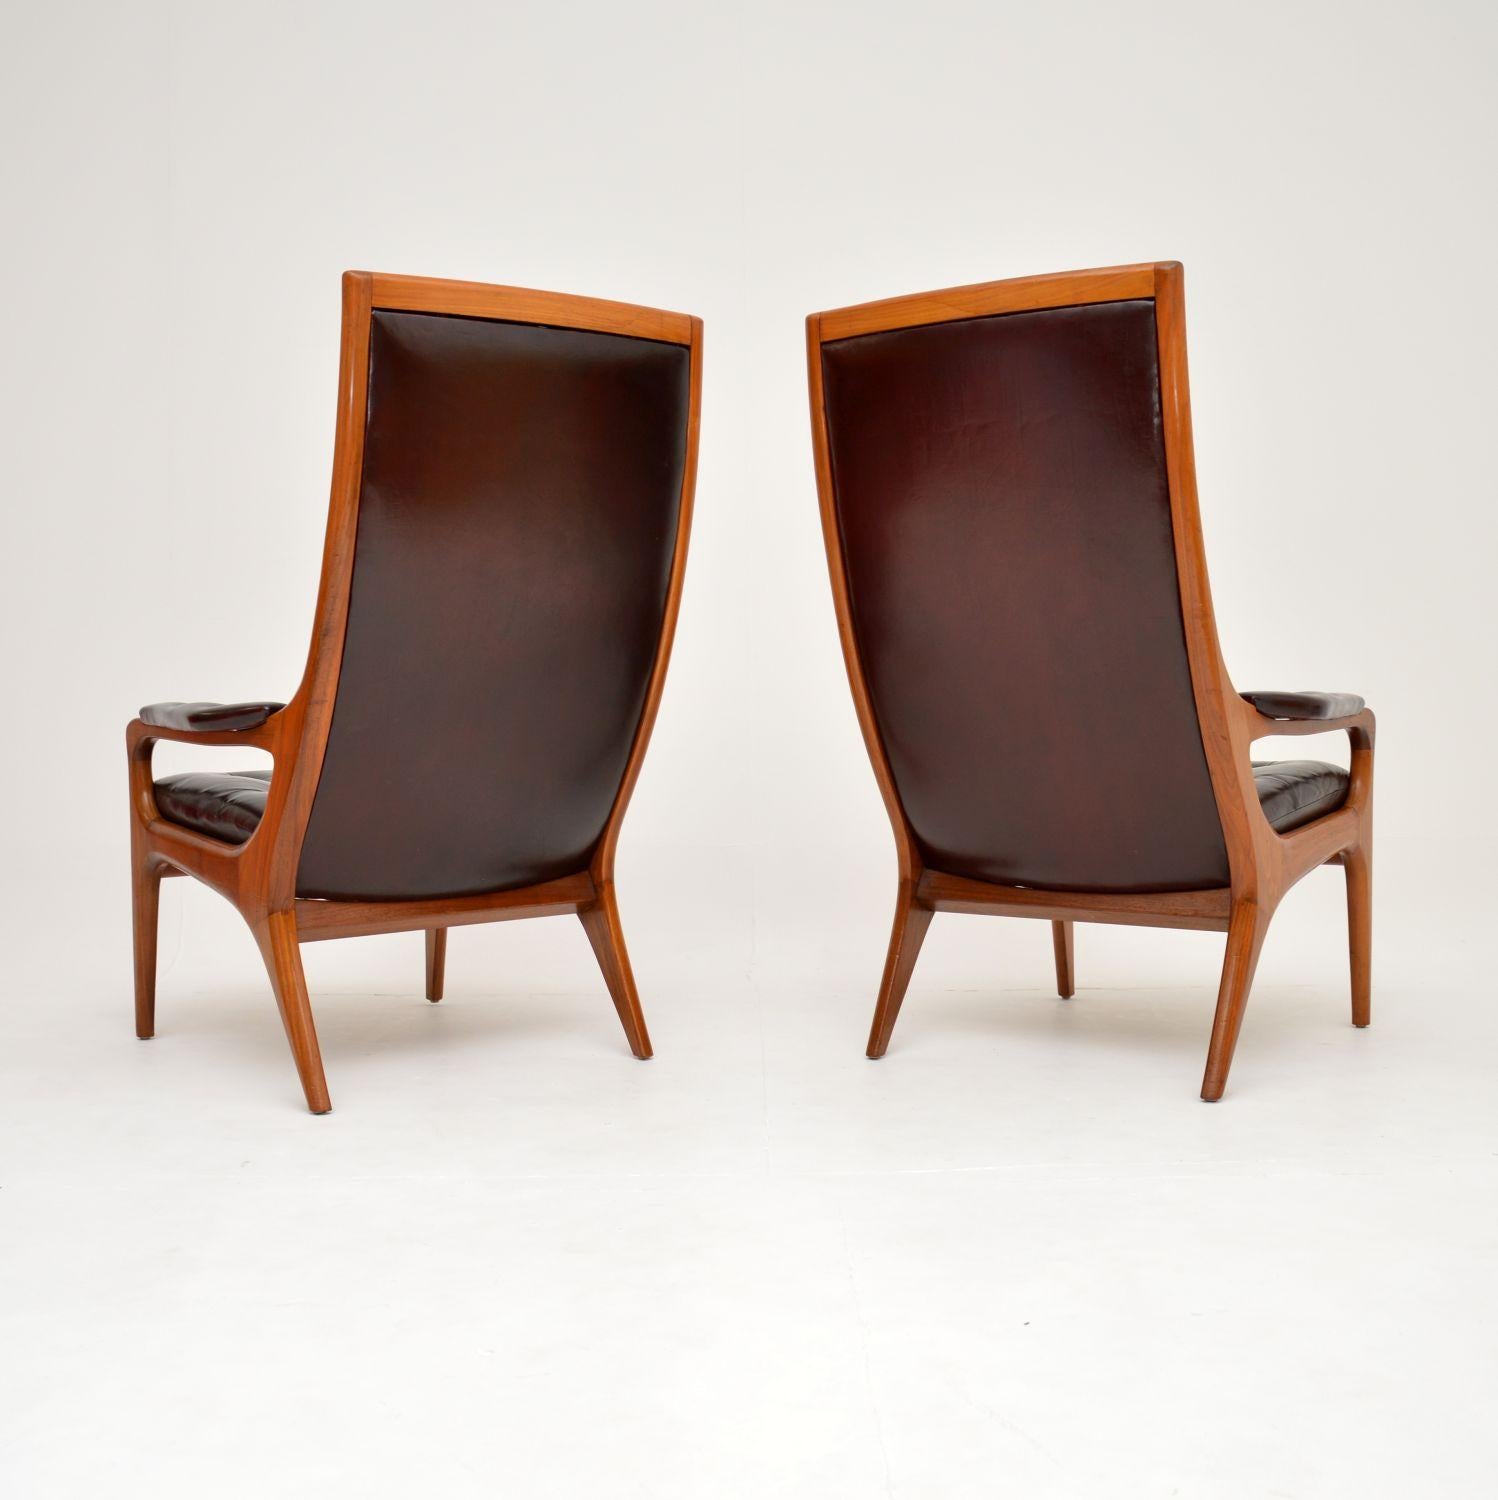 British 1960’s Pair of Vintage Walnut & Leather Armchairs by Howard Keith For Sale